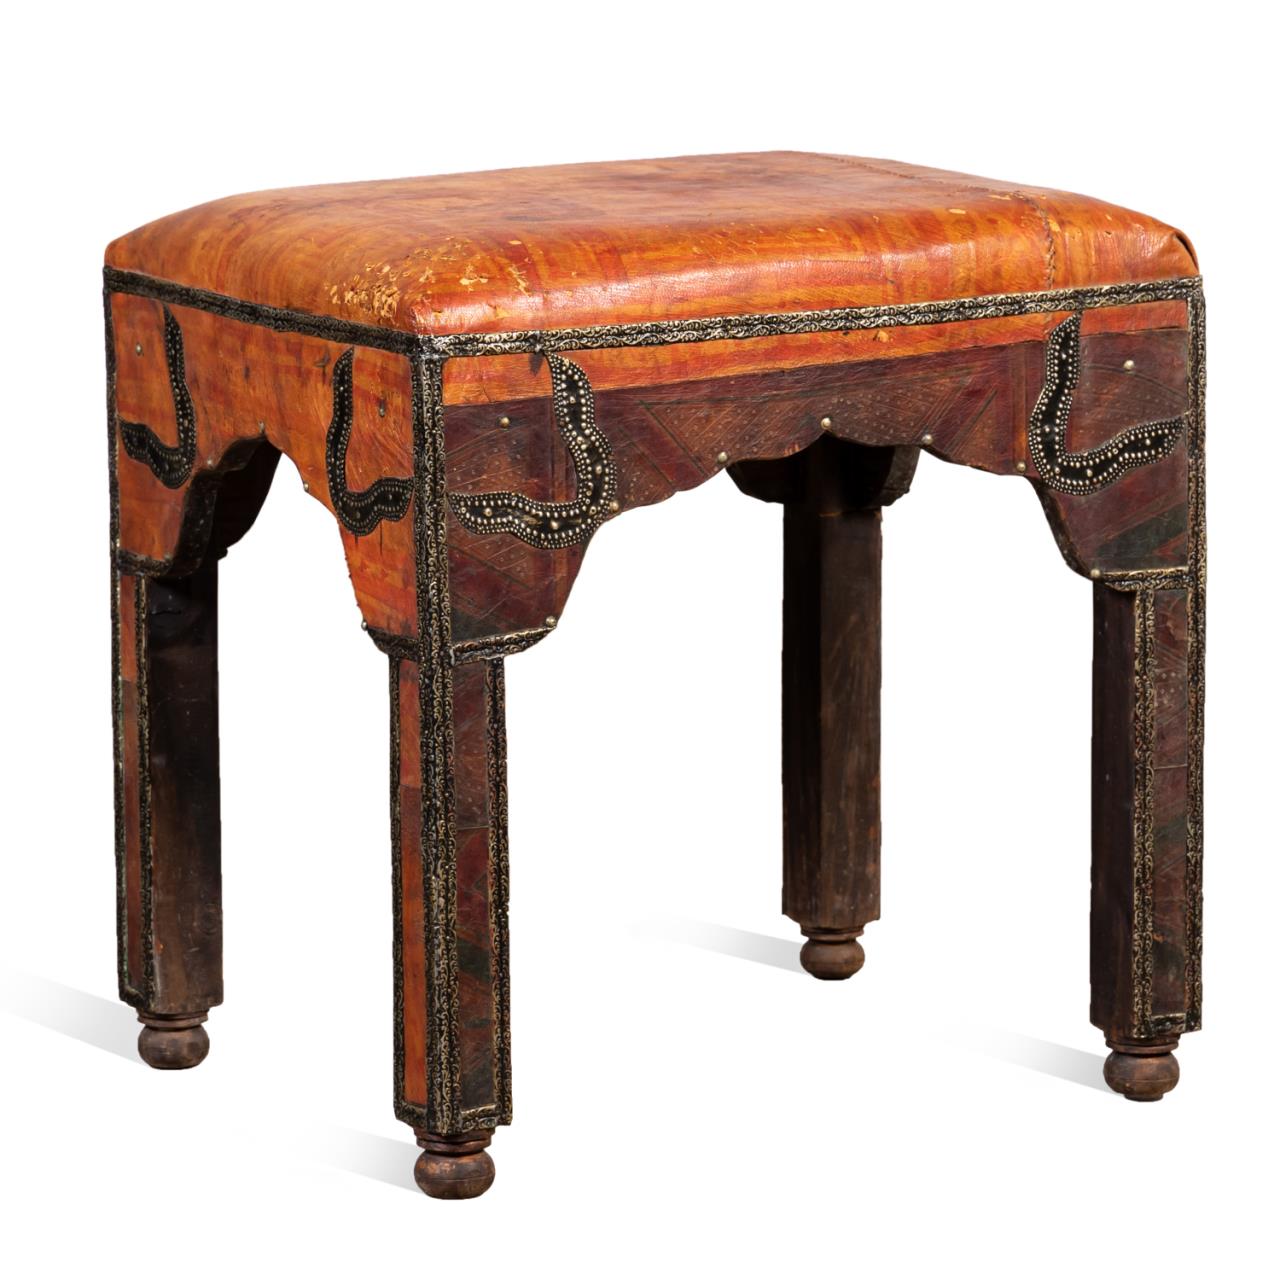 MOROCCAN STOOL WITH TUAREG LEATHER 29f943